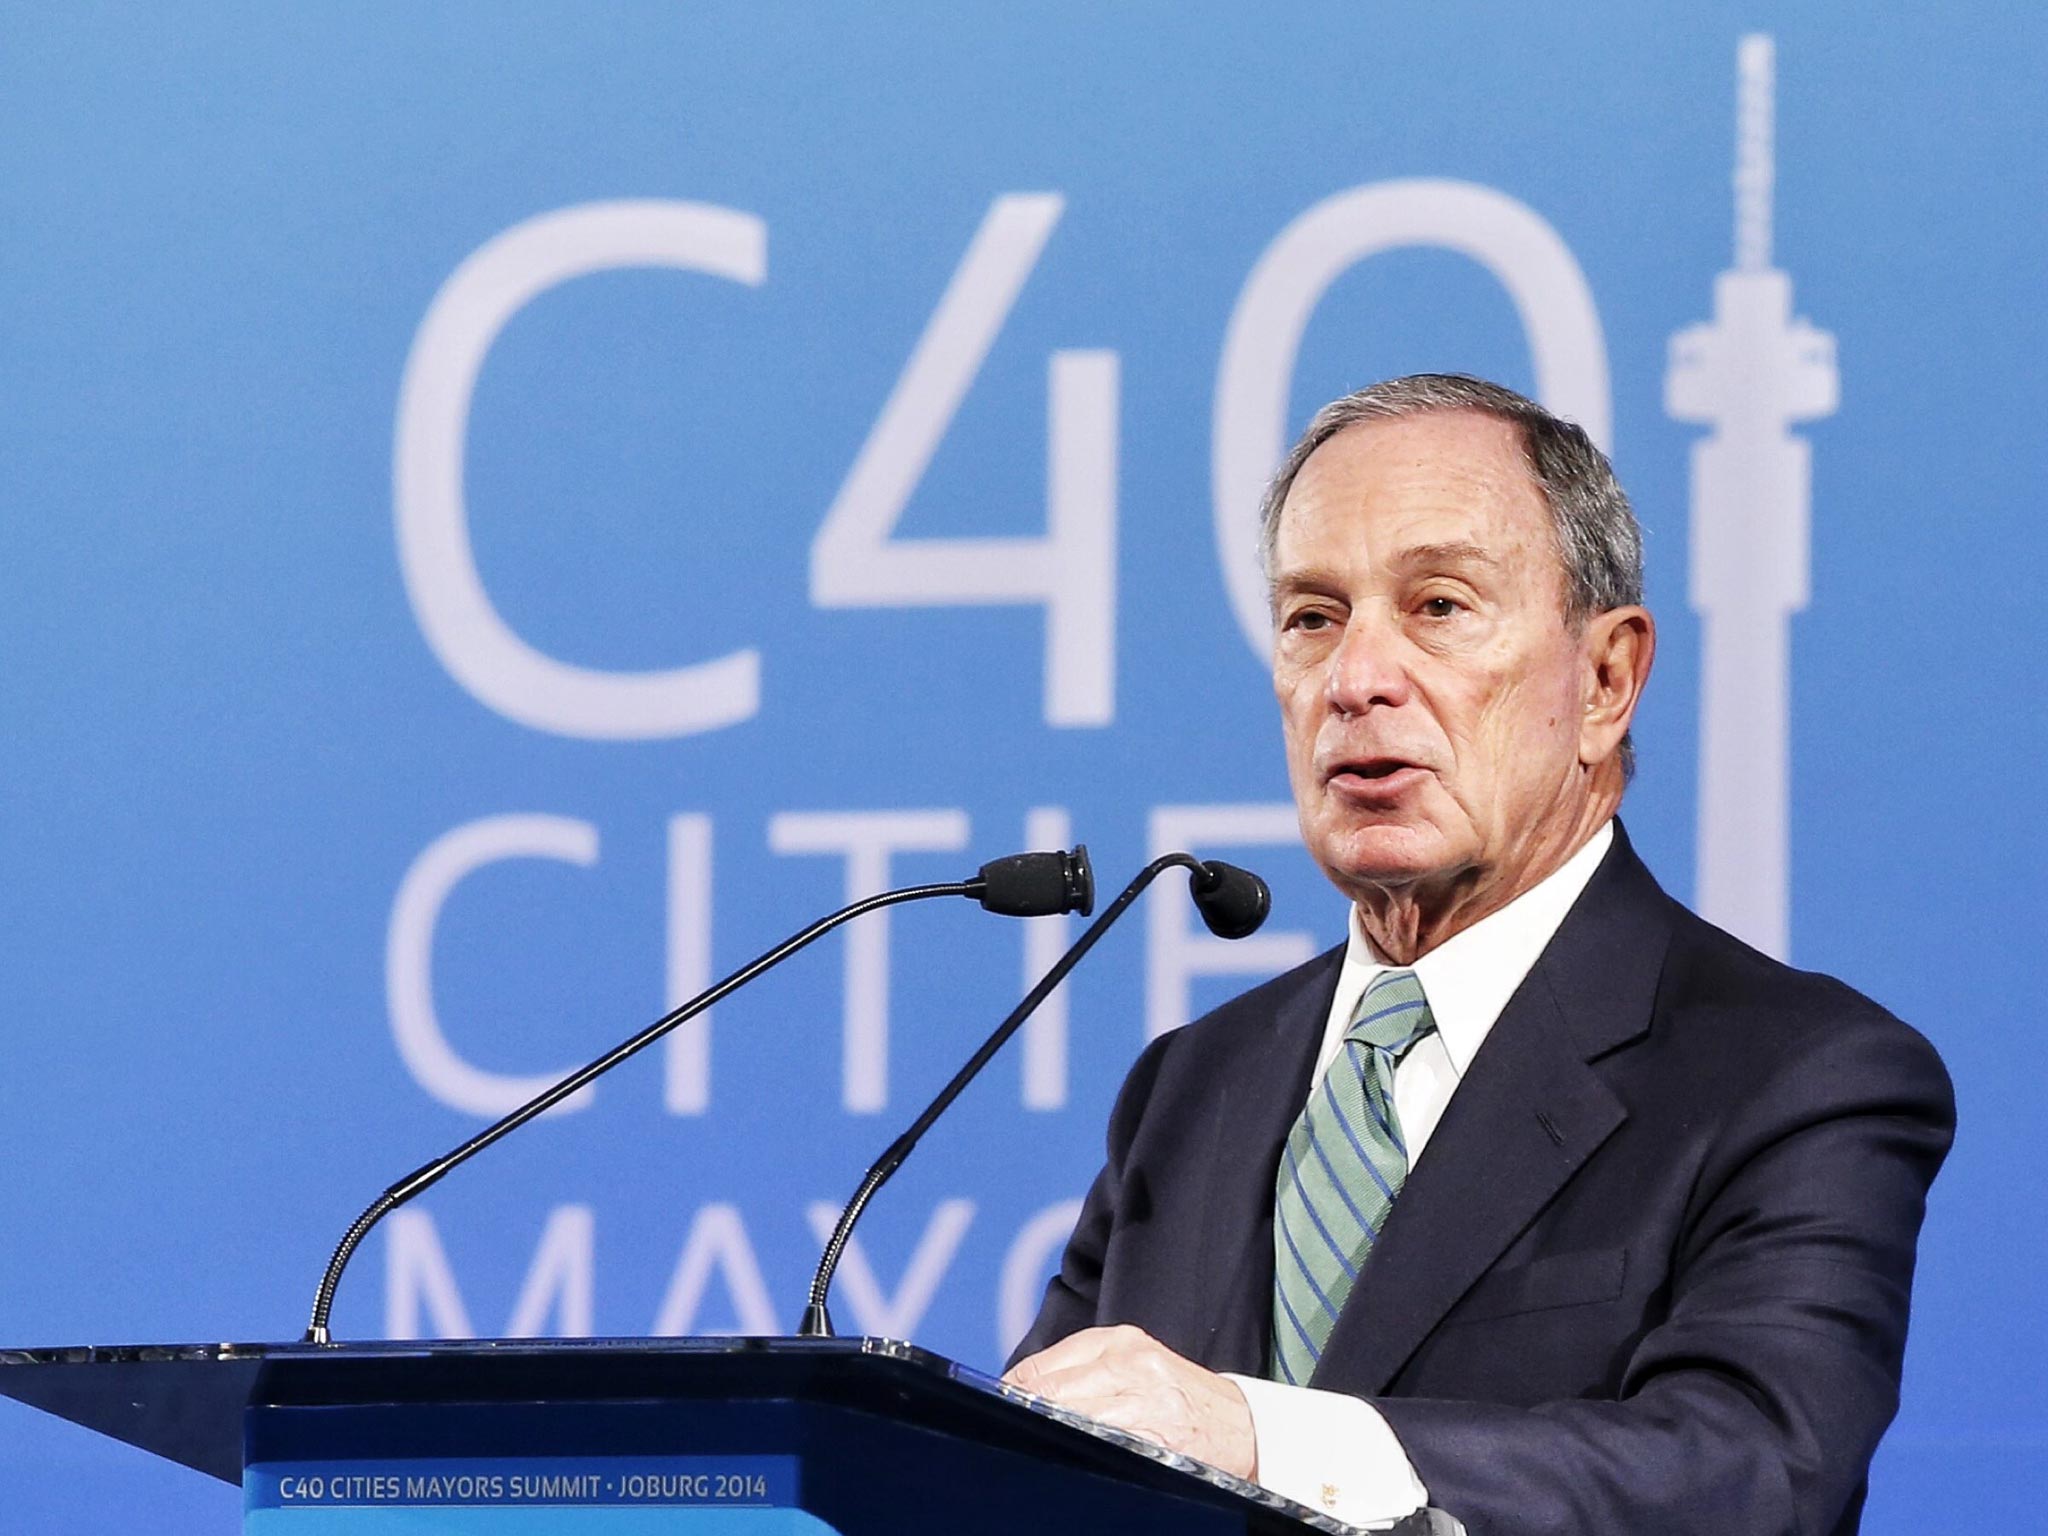 Michael Bloomberg, founder and owner of the data provider and organisation